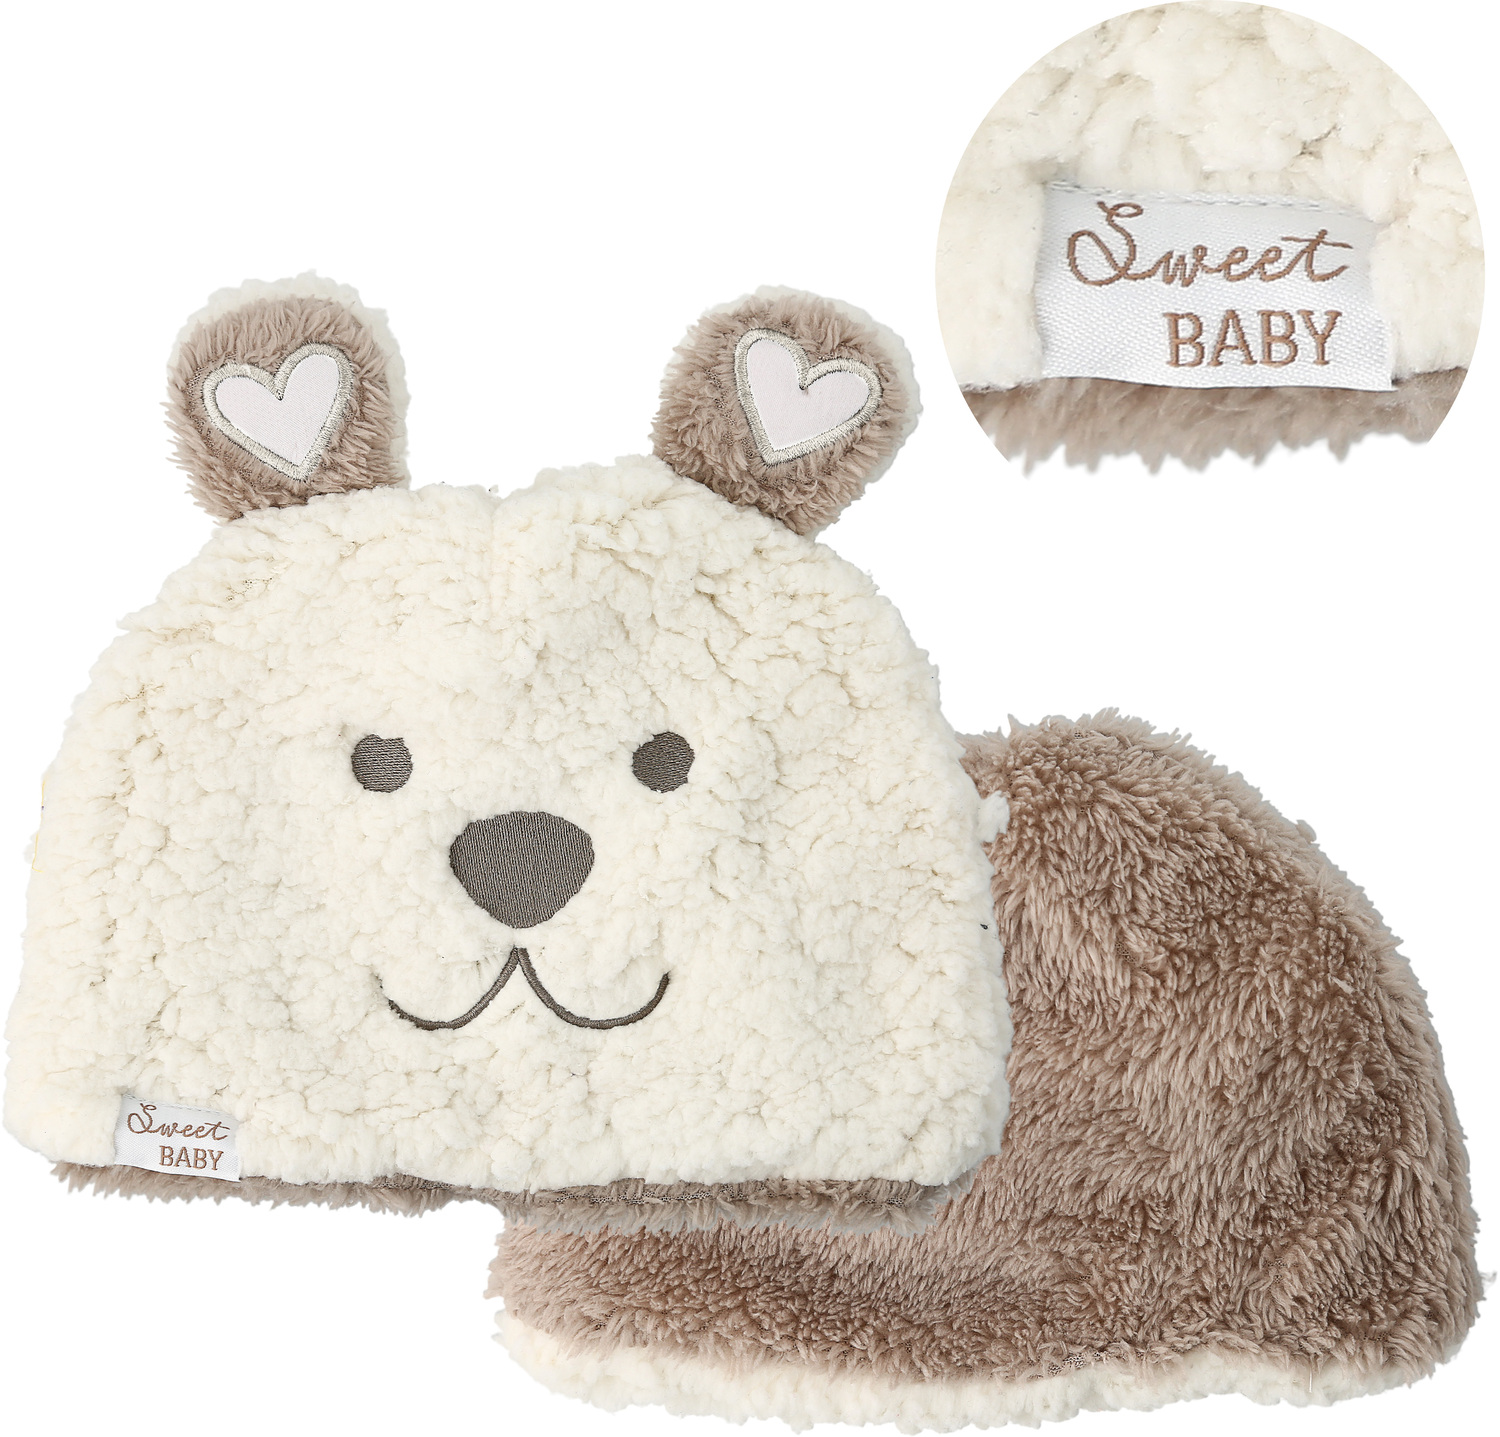 Sweet Baby by Comfort Collection - Sweet Baby - One Size Fits Most, Baby Bear Hat